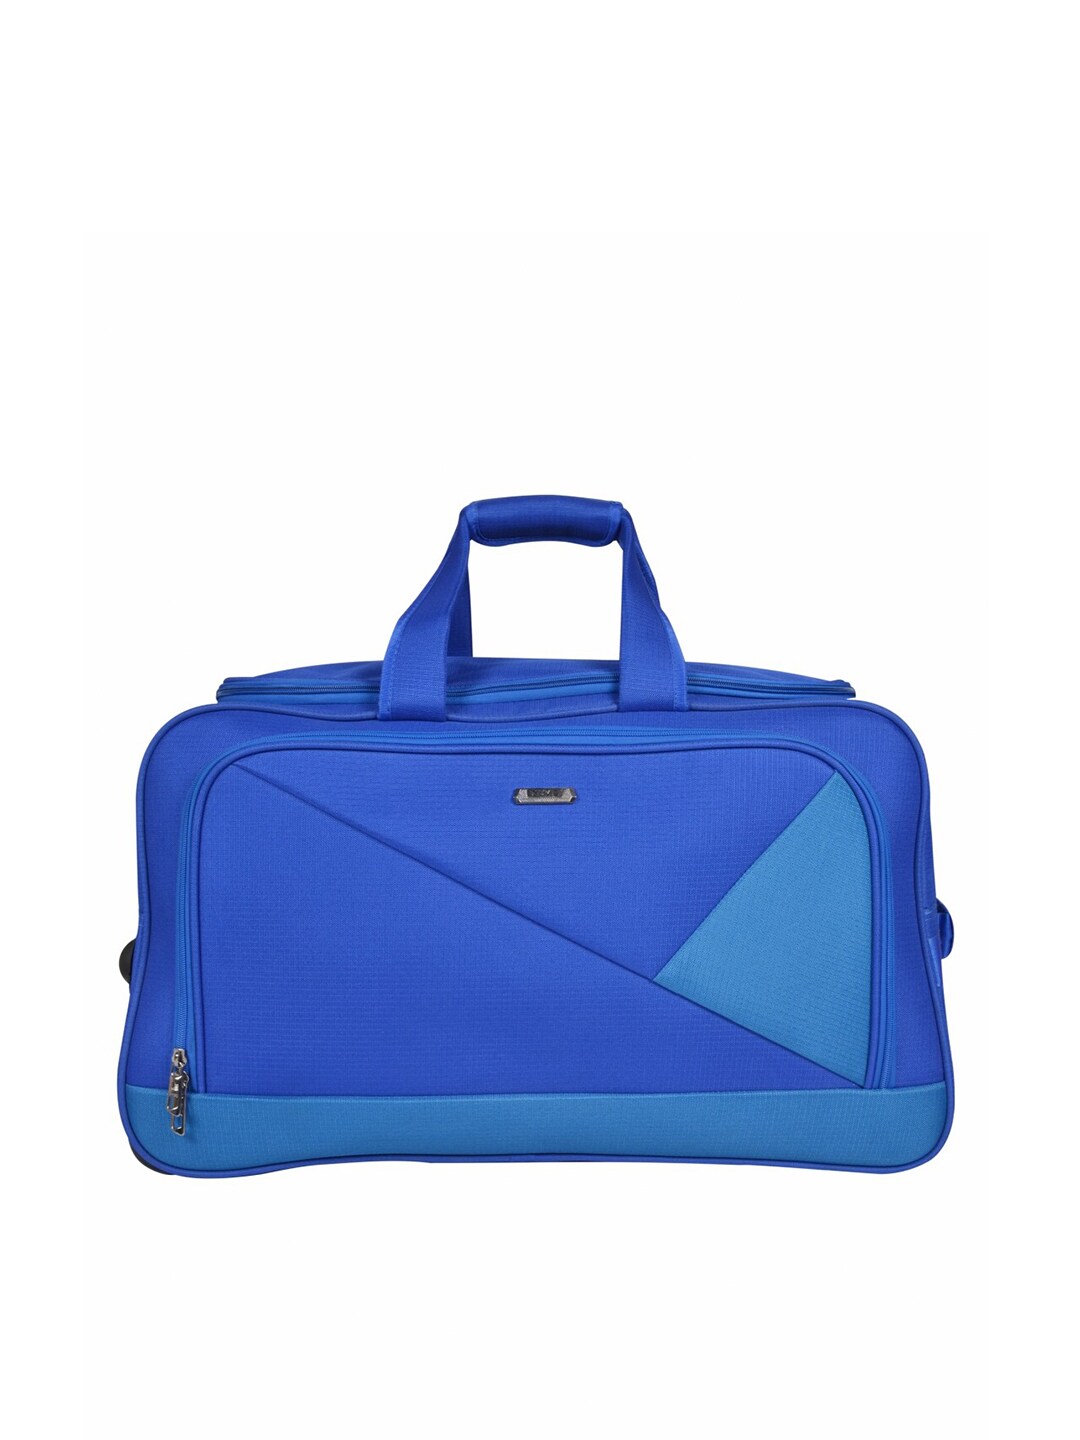 EUME Blue Colourblocked Duffel Bag With Trolley Price in India